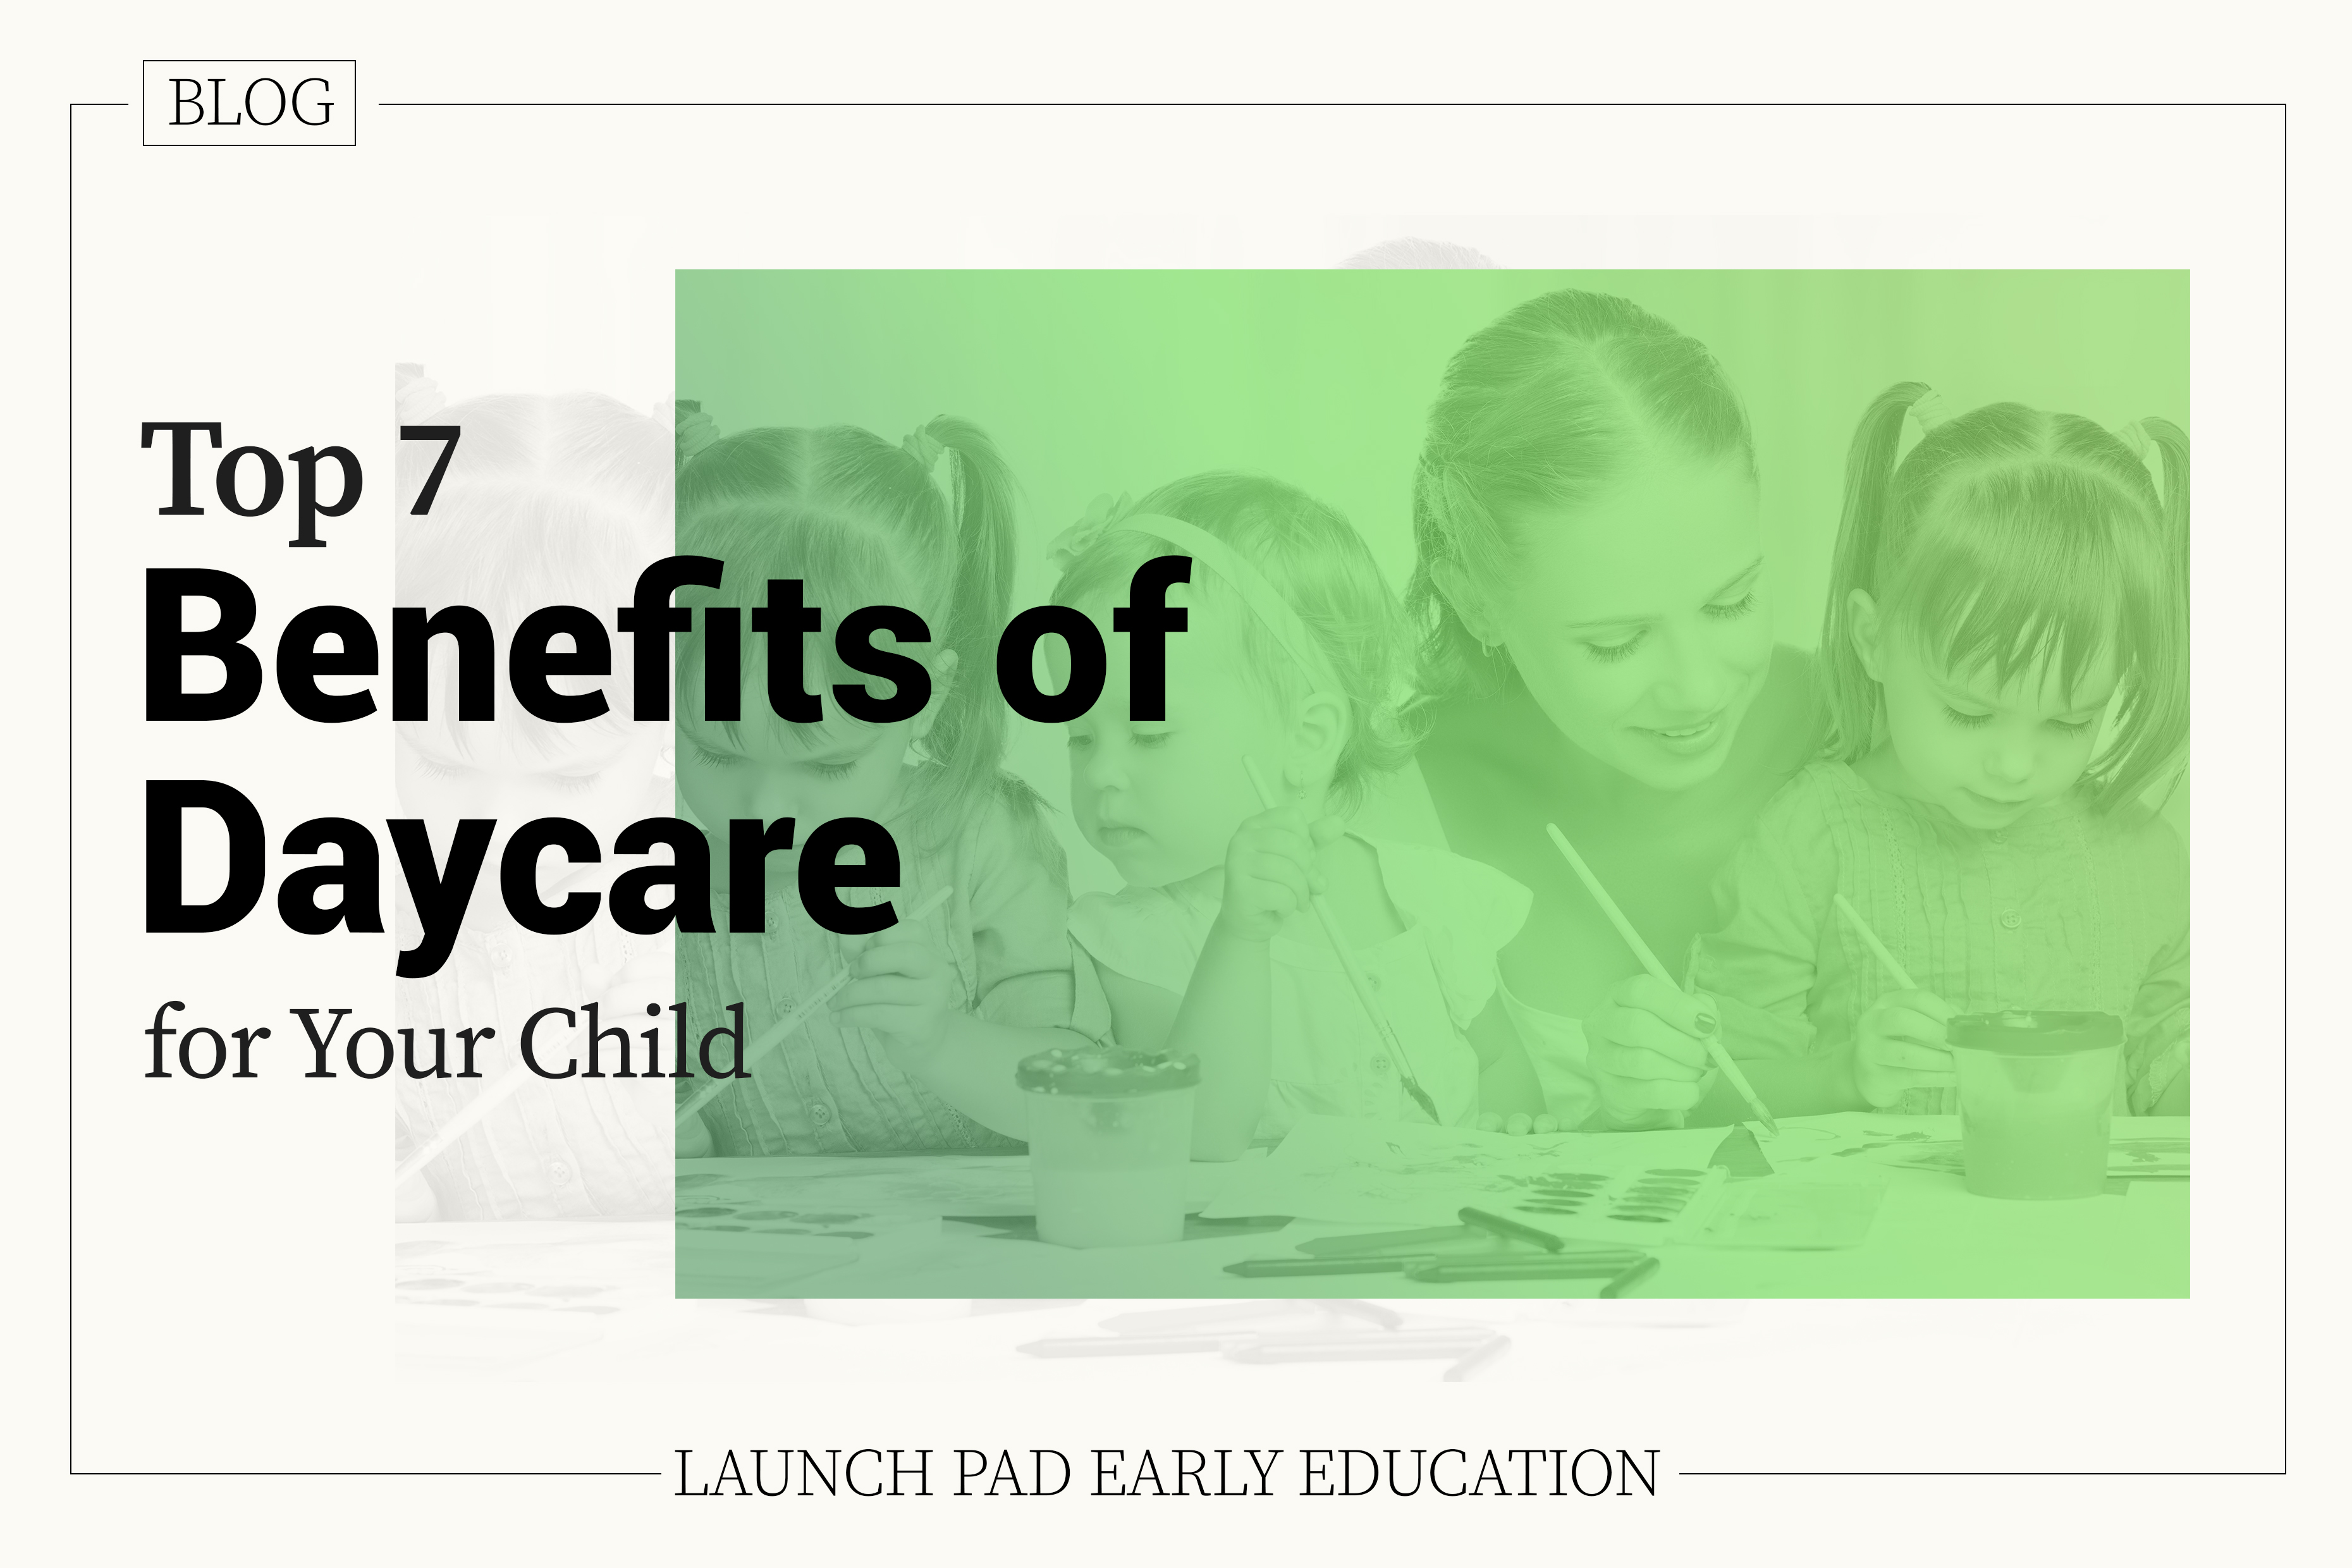 Top 7 Benefits of Daycare for Your Child